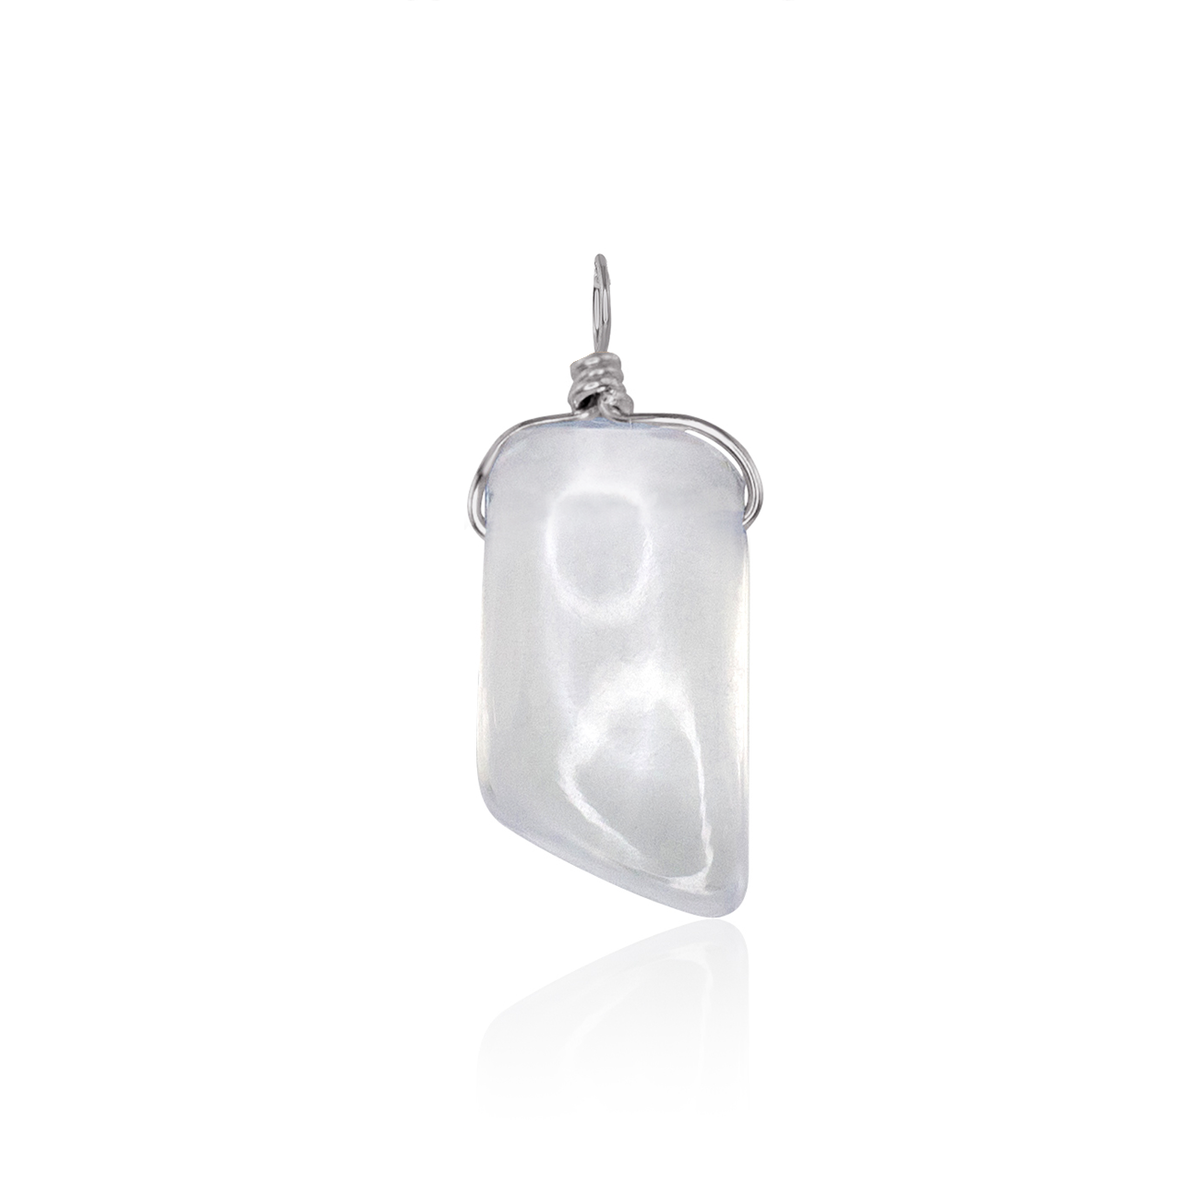 Small Smooth Crystal Quartz Crystal Pendant with Gentle Point